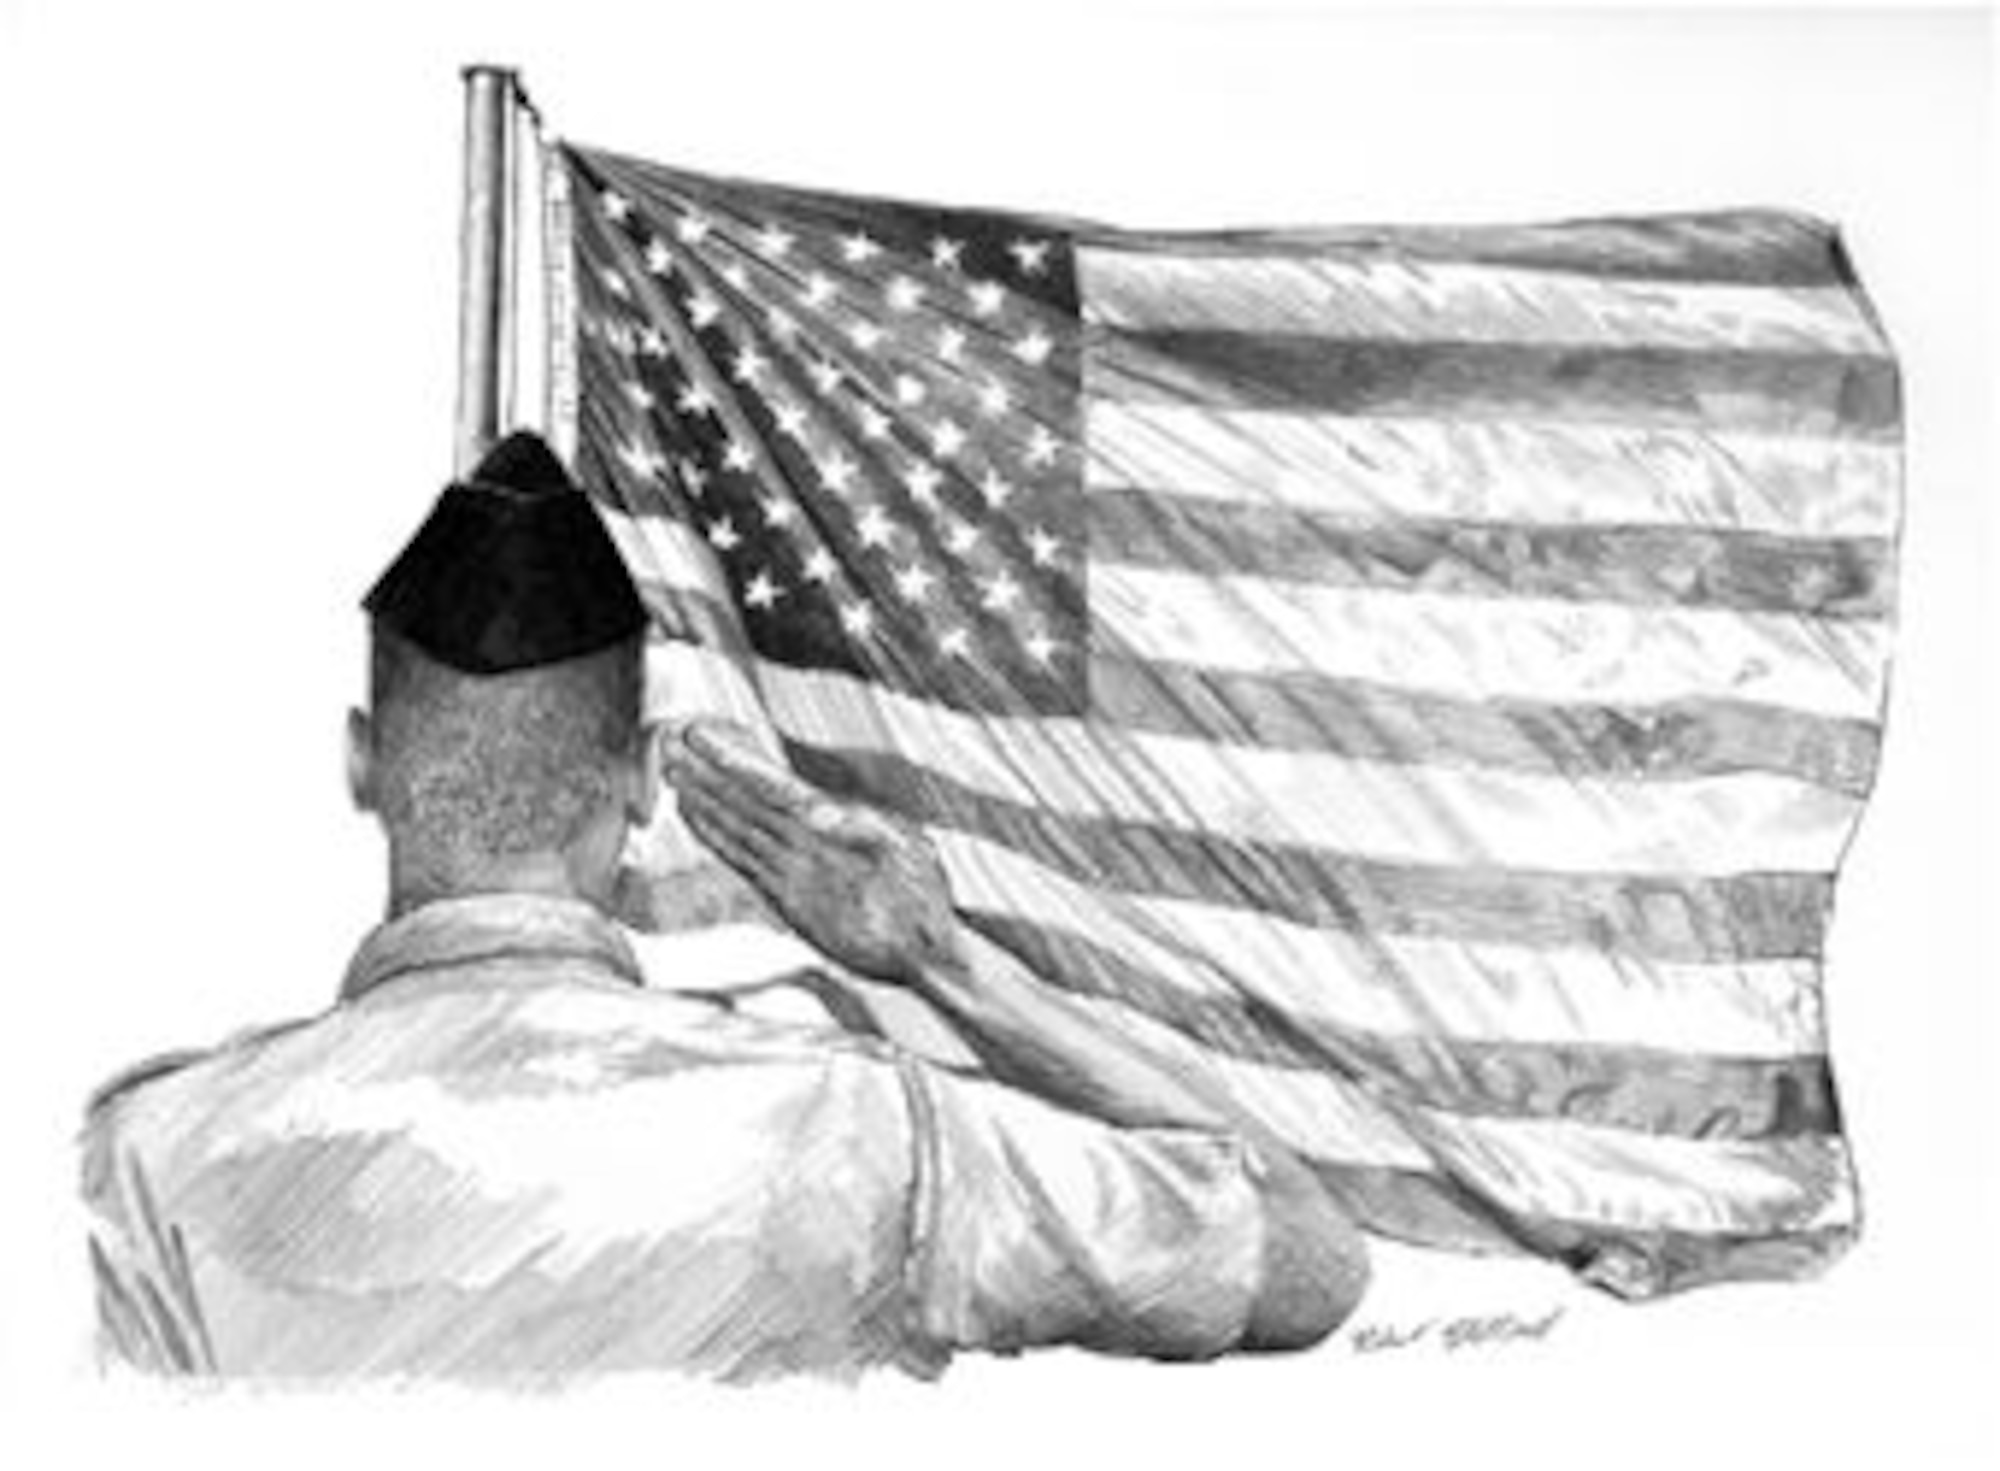 A U.S. Air Force Airman renders a salute to the American flag, depicting the proper respect to pay. According to Air Force Instruction 34-1201, Protocol, 8.1.6.2, when reveille or retreat is played, following “To the Color,” or the national anthem, military members are required to salute facing the flag or the direction of the music. Airmen are required to salute when the flag is raised, lowered or hoisted, including passing during special ceremonies. (U.S. Air Force illustration/Bob Stillwell) 